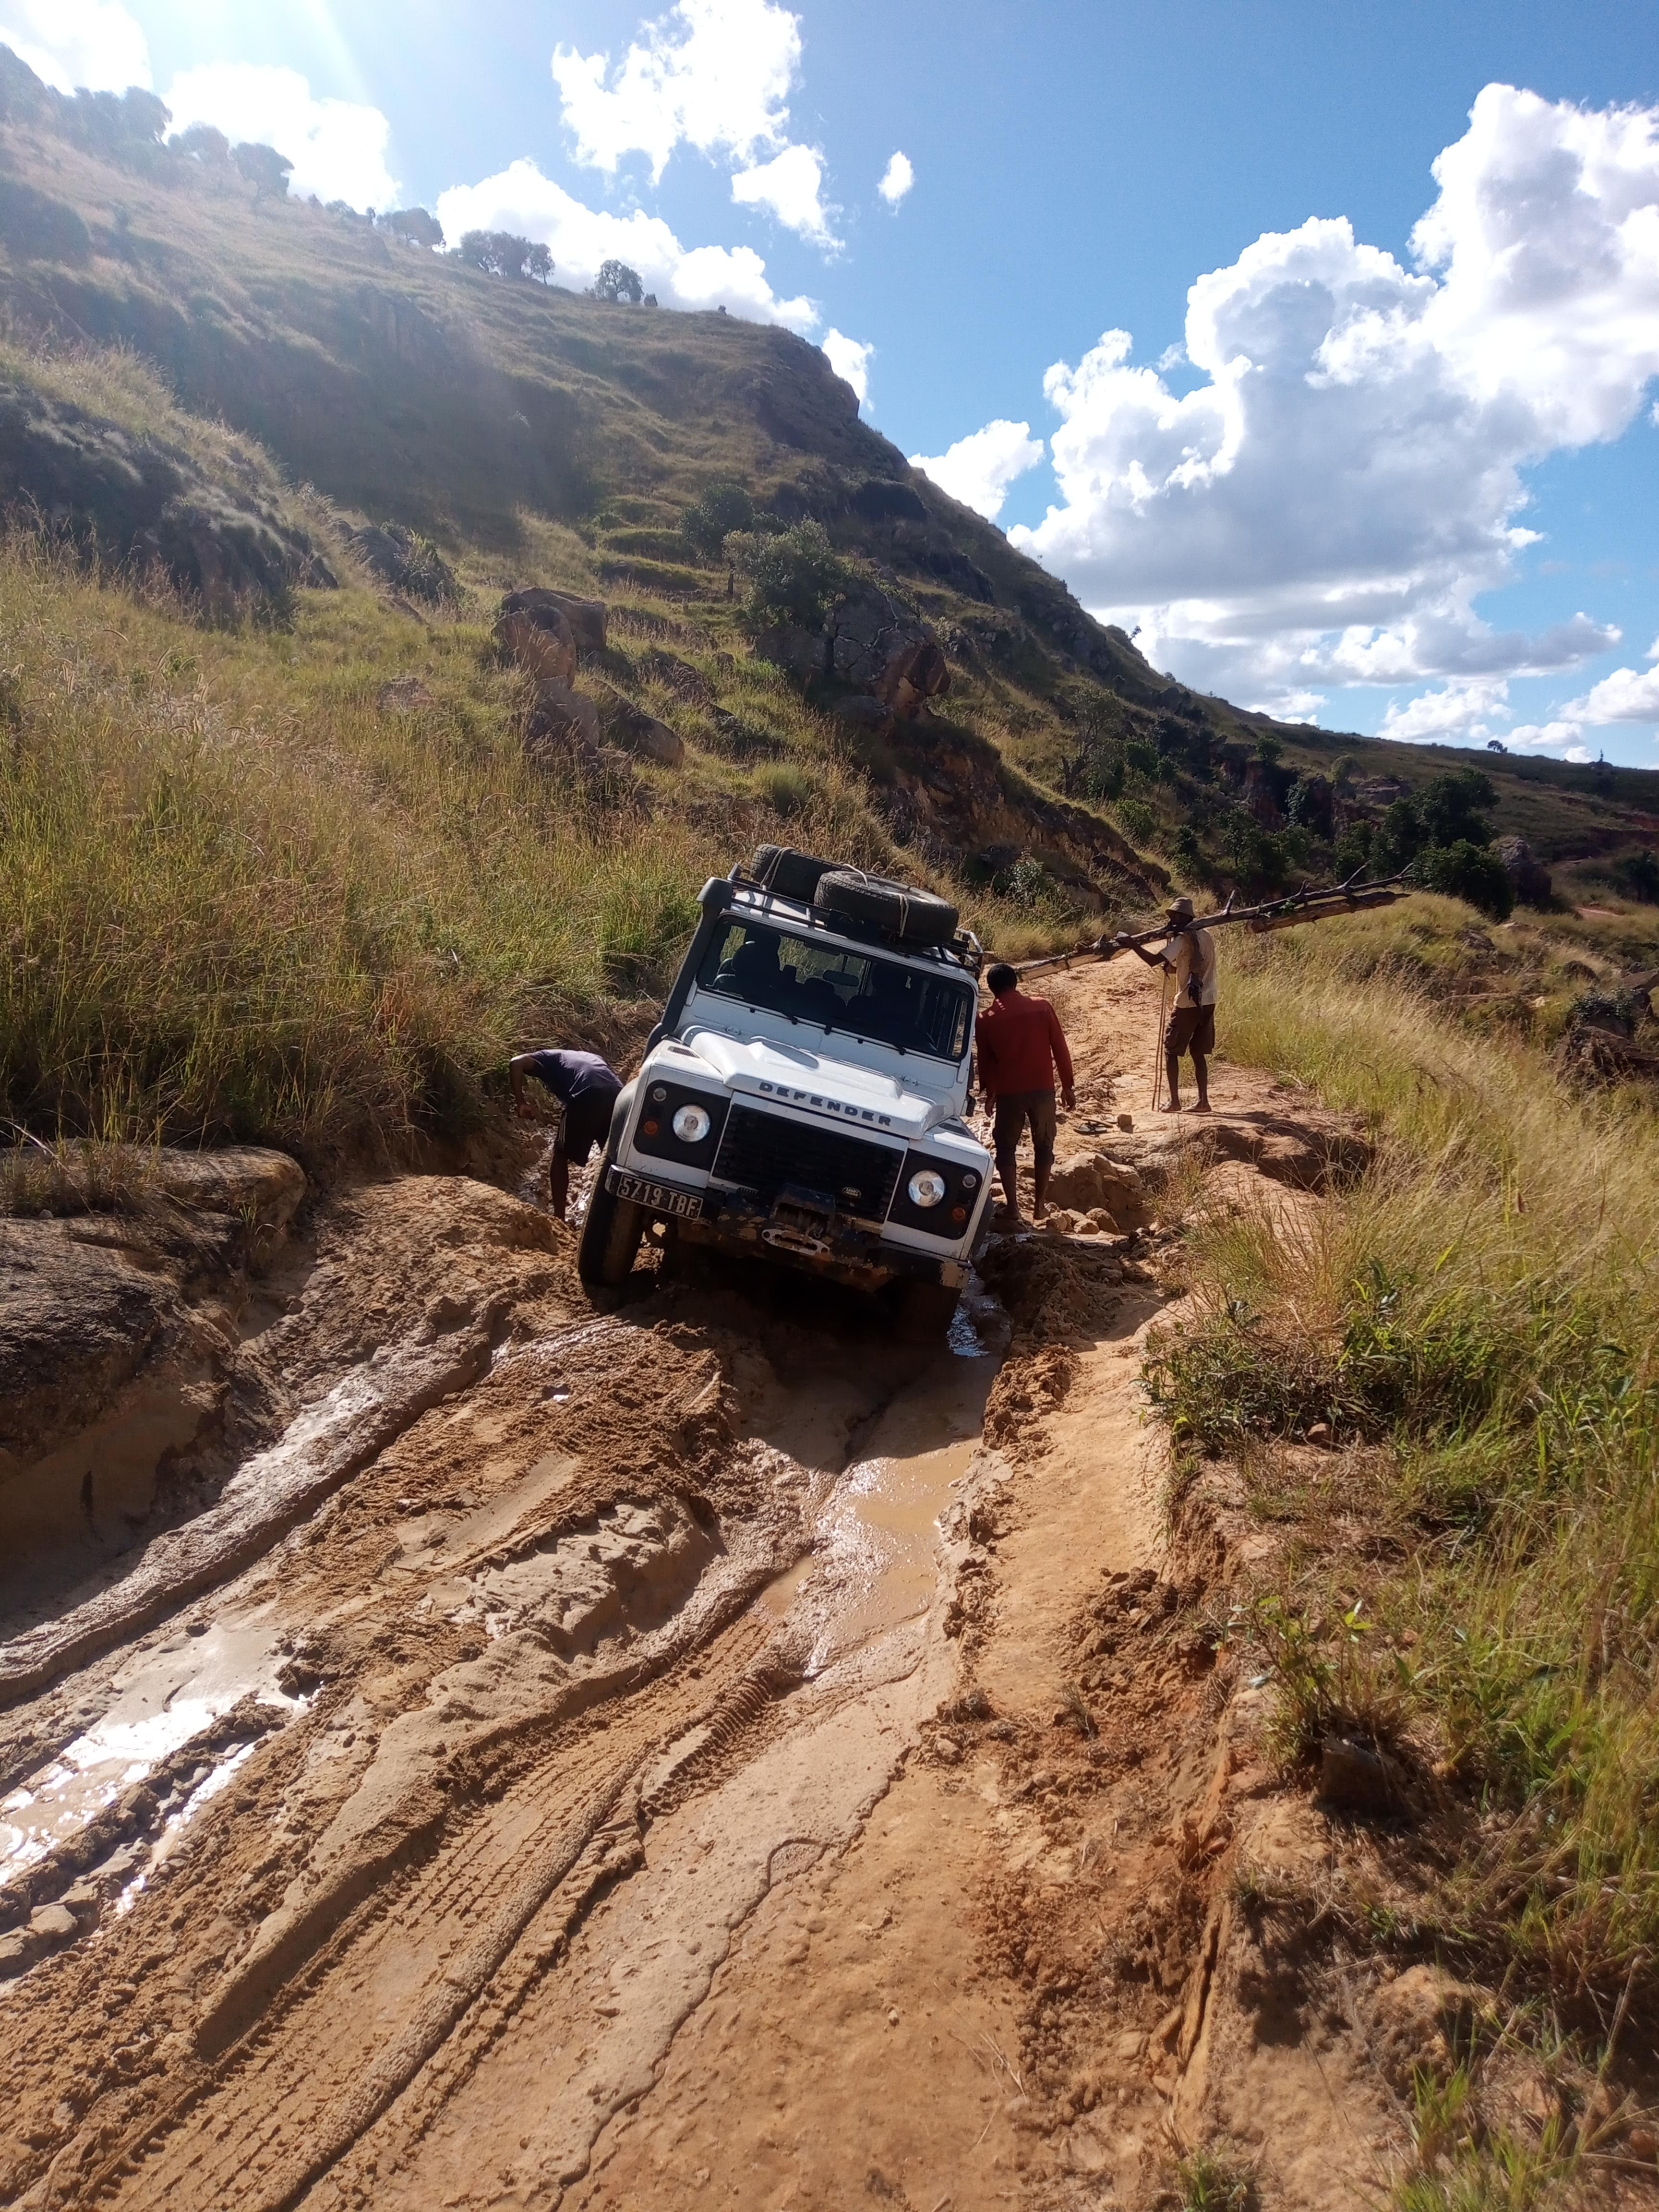 Conquering the treacherous road: our 4x4 vehicle valiantly struggles through the muddy terrain, and this is dry season! 